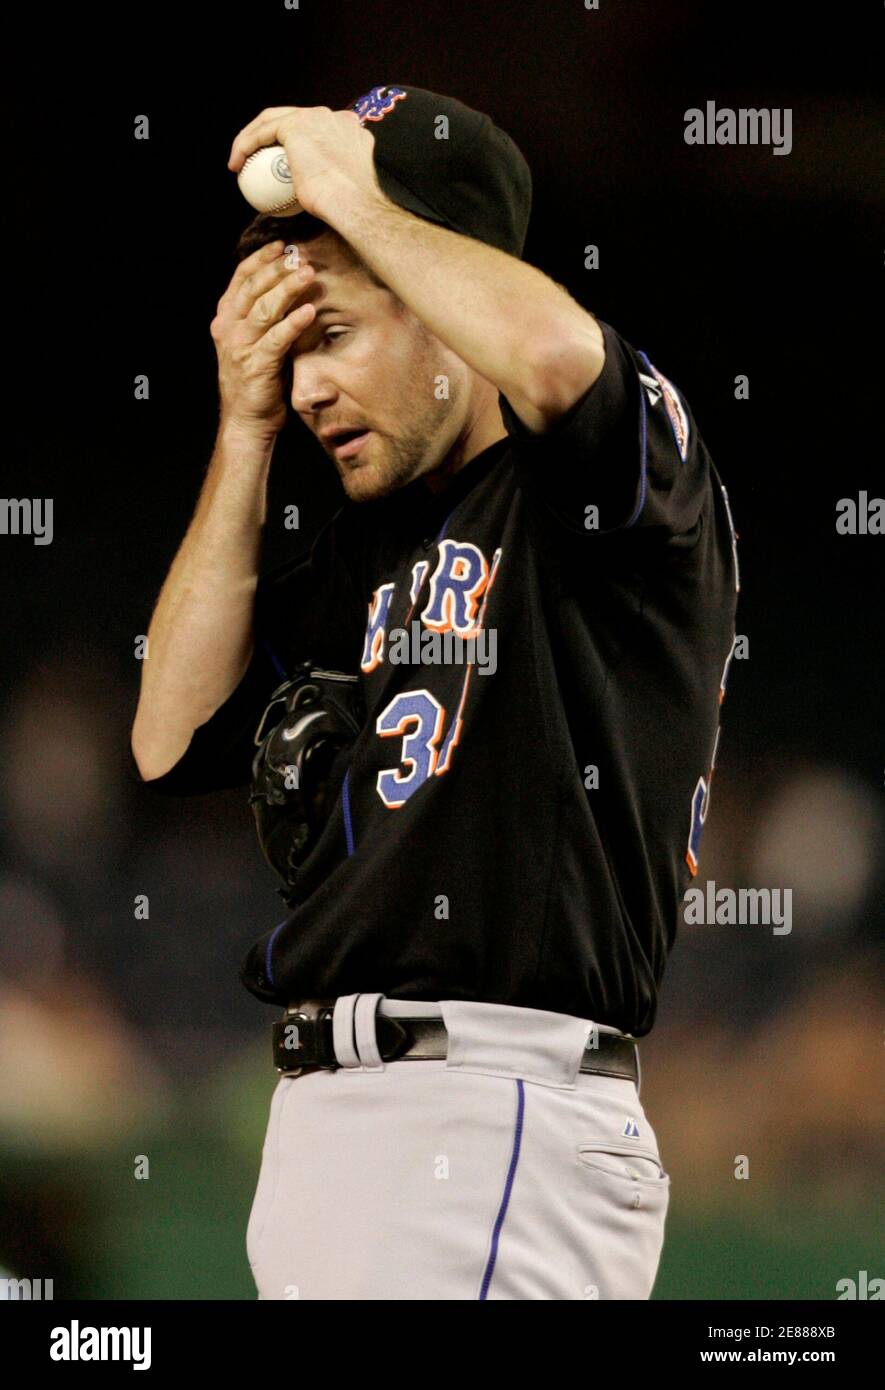 New York Mets starting pitcher Mike Pelfrey wipes his brow in the fifth inning of their MLB baseball game against the Washington Nationals in Washington September 16, 2008.       REUTERS/Gary Cameron   (UNITED STATES) Stock Photo